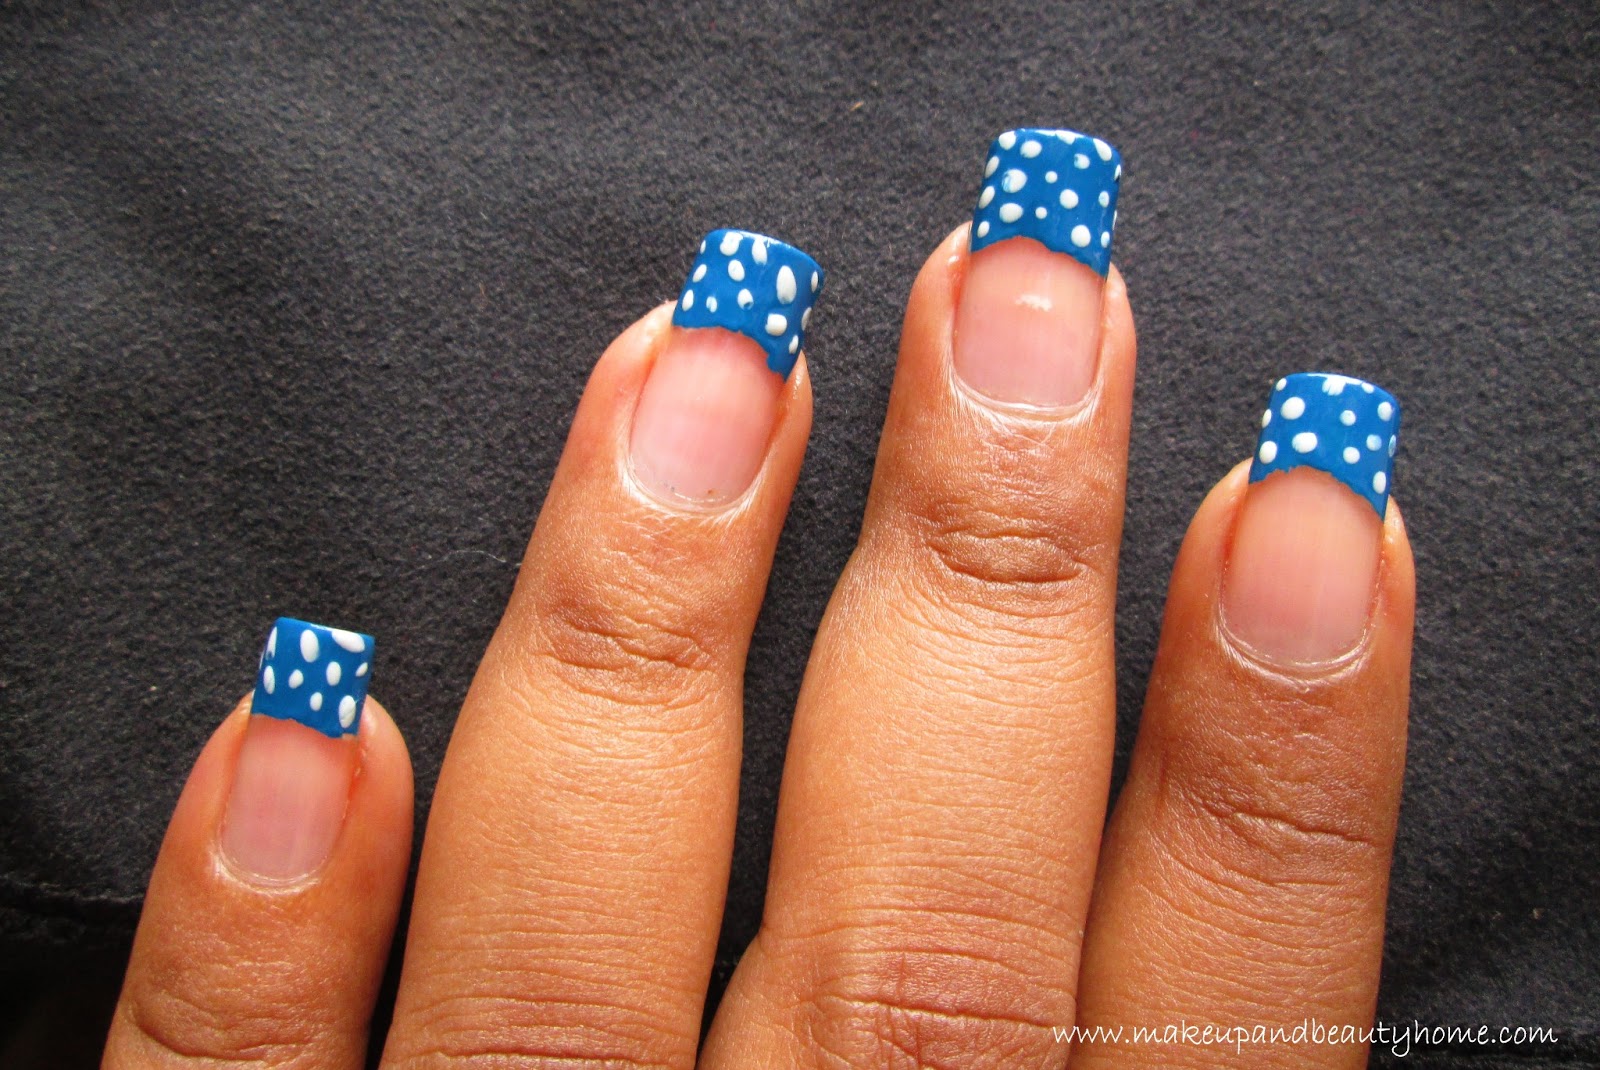 3. DIY Nail Art Ideas for Every Skill Level - wide 3